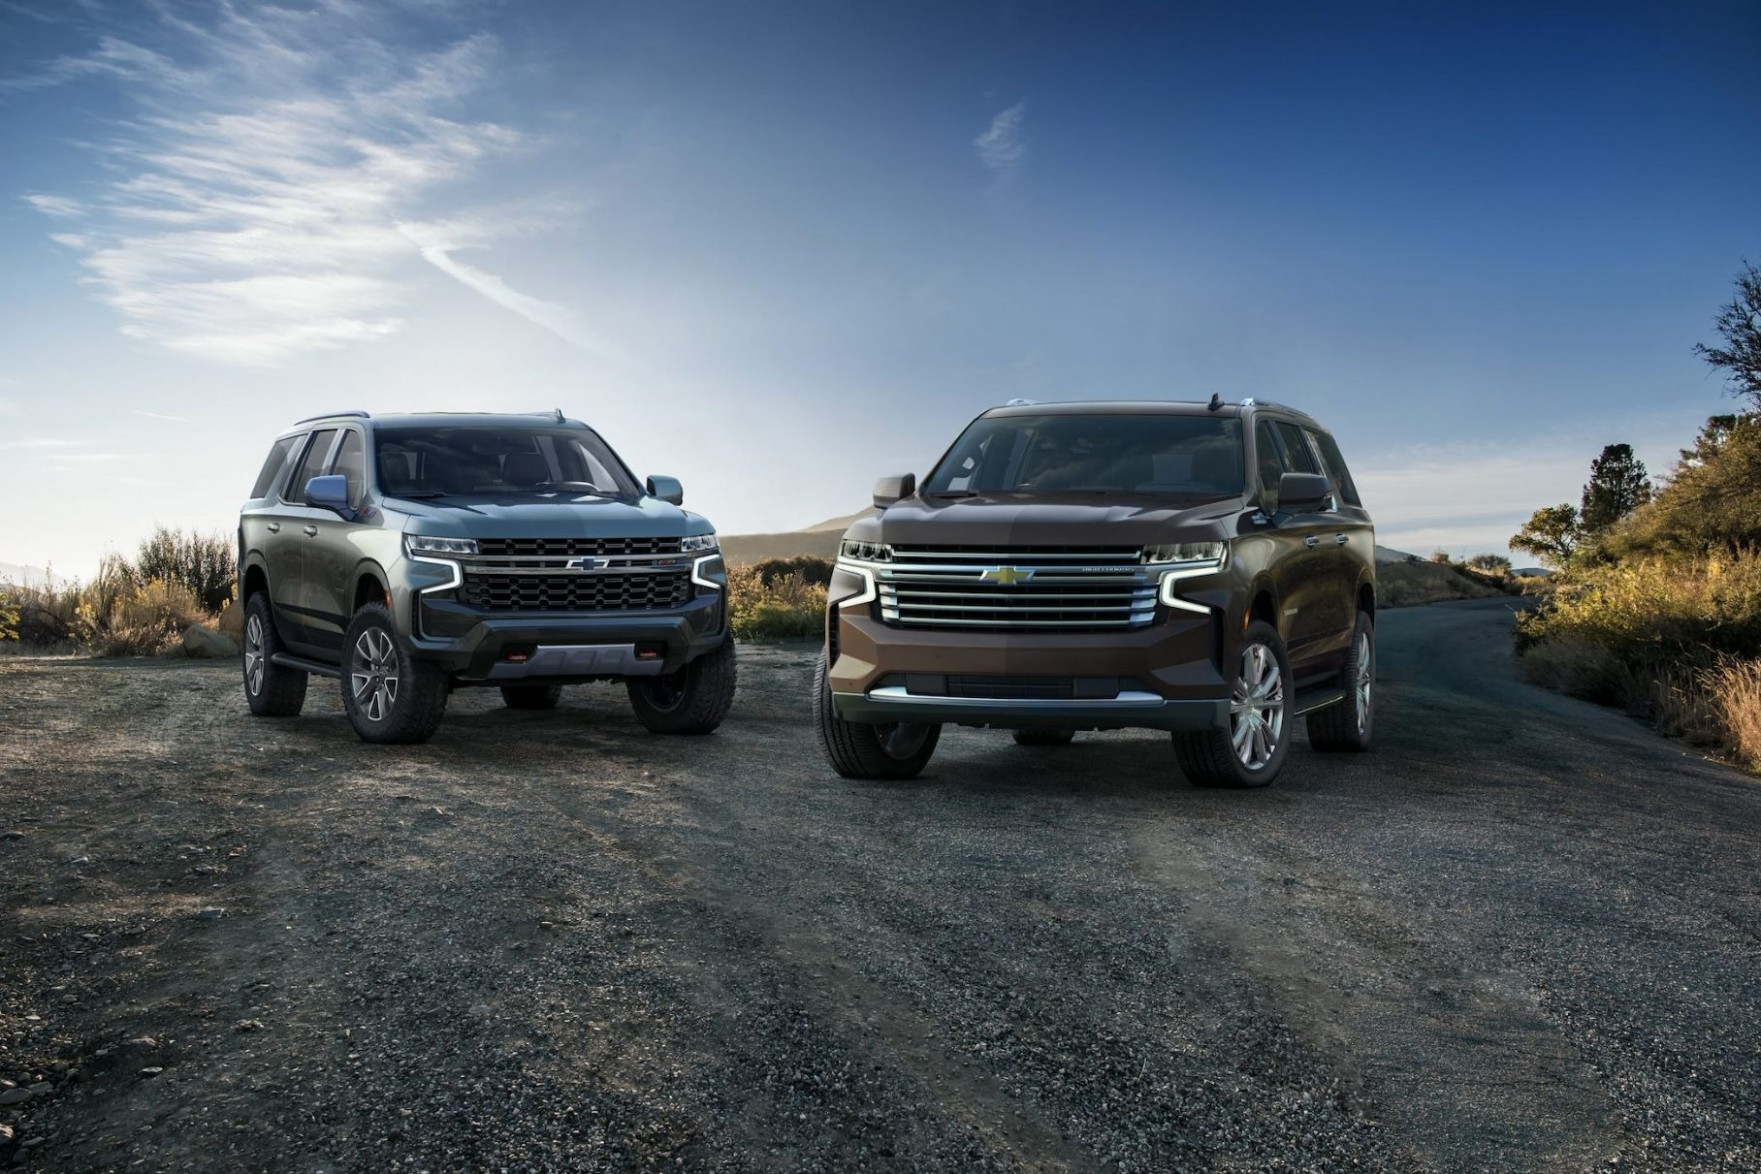 Exterior and Interior New Chevrolet Tahoe 2022